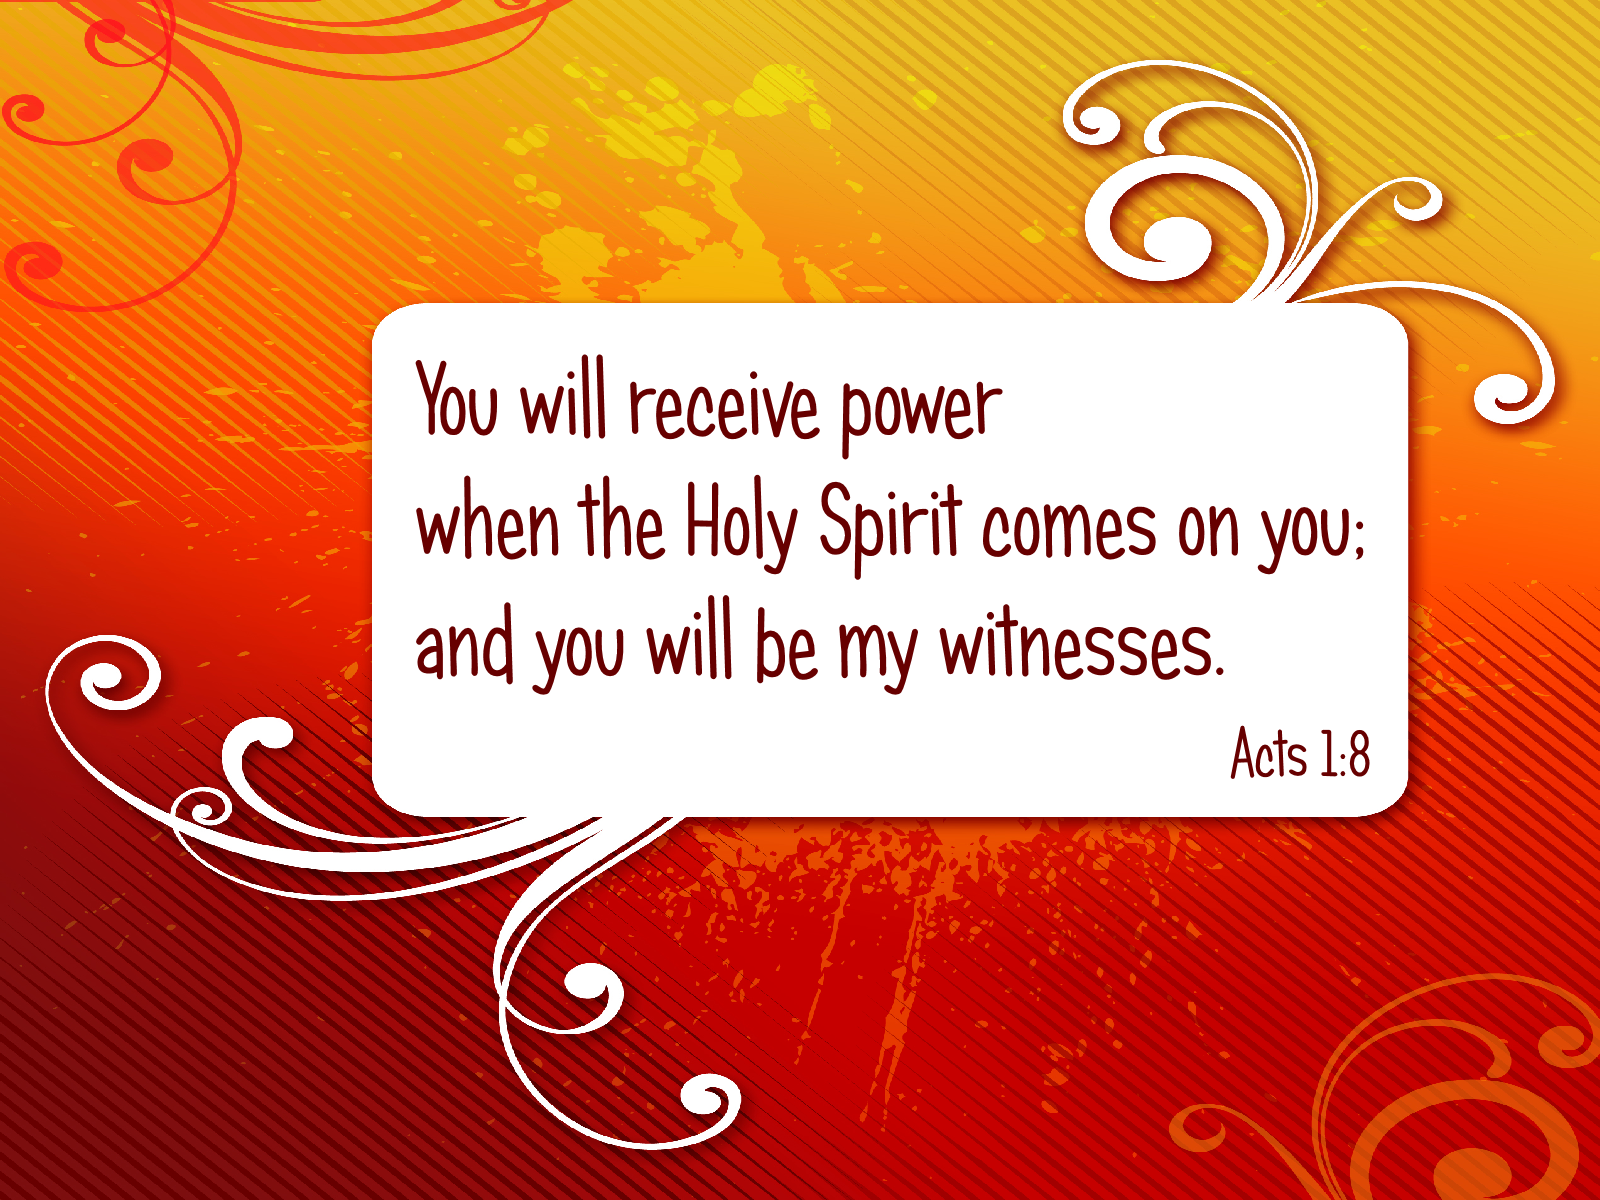 You will receive power when the Holy Spirit comes on you; and you will be my witnesses. | Acts 1:8